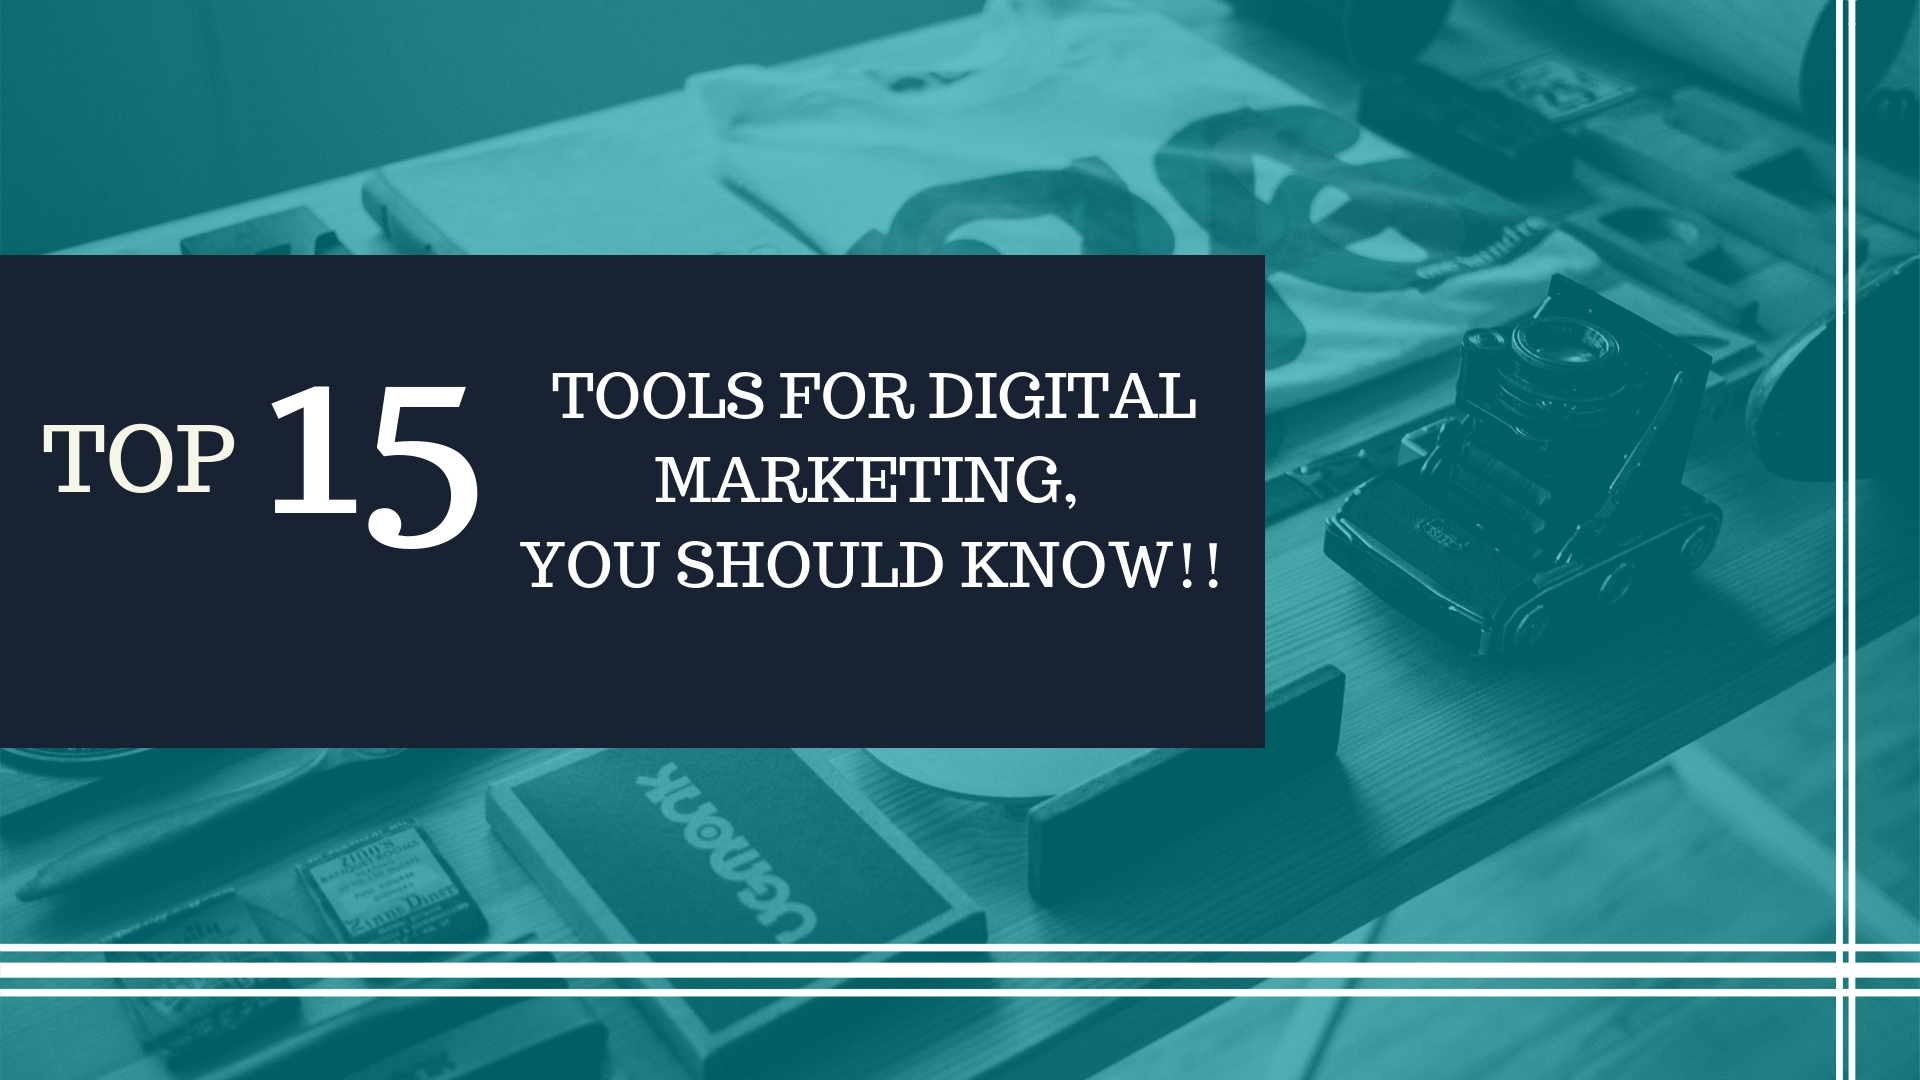 Here are some recommended best tools that you should always have